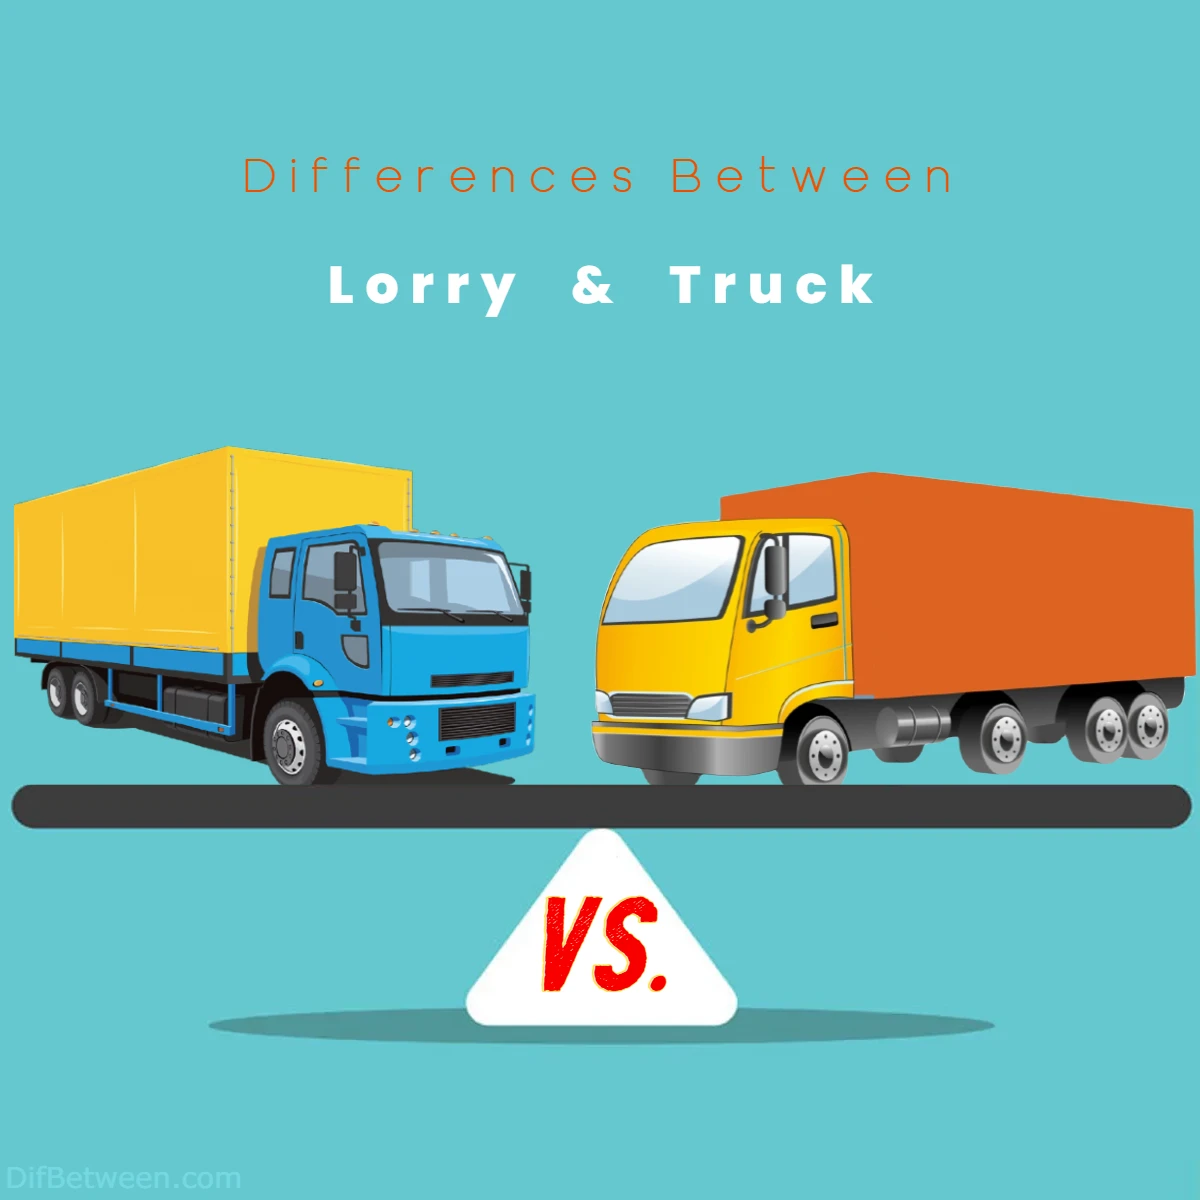 Differences Between Lorry vs Truck